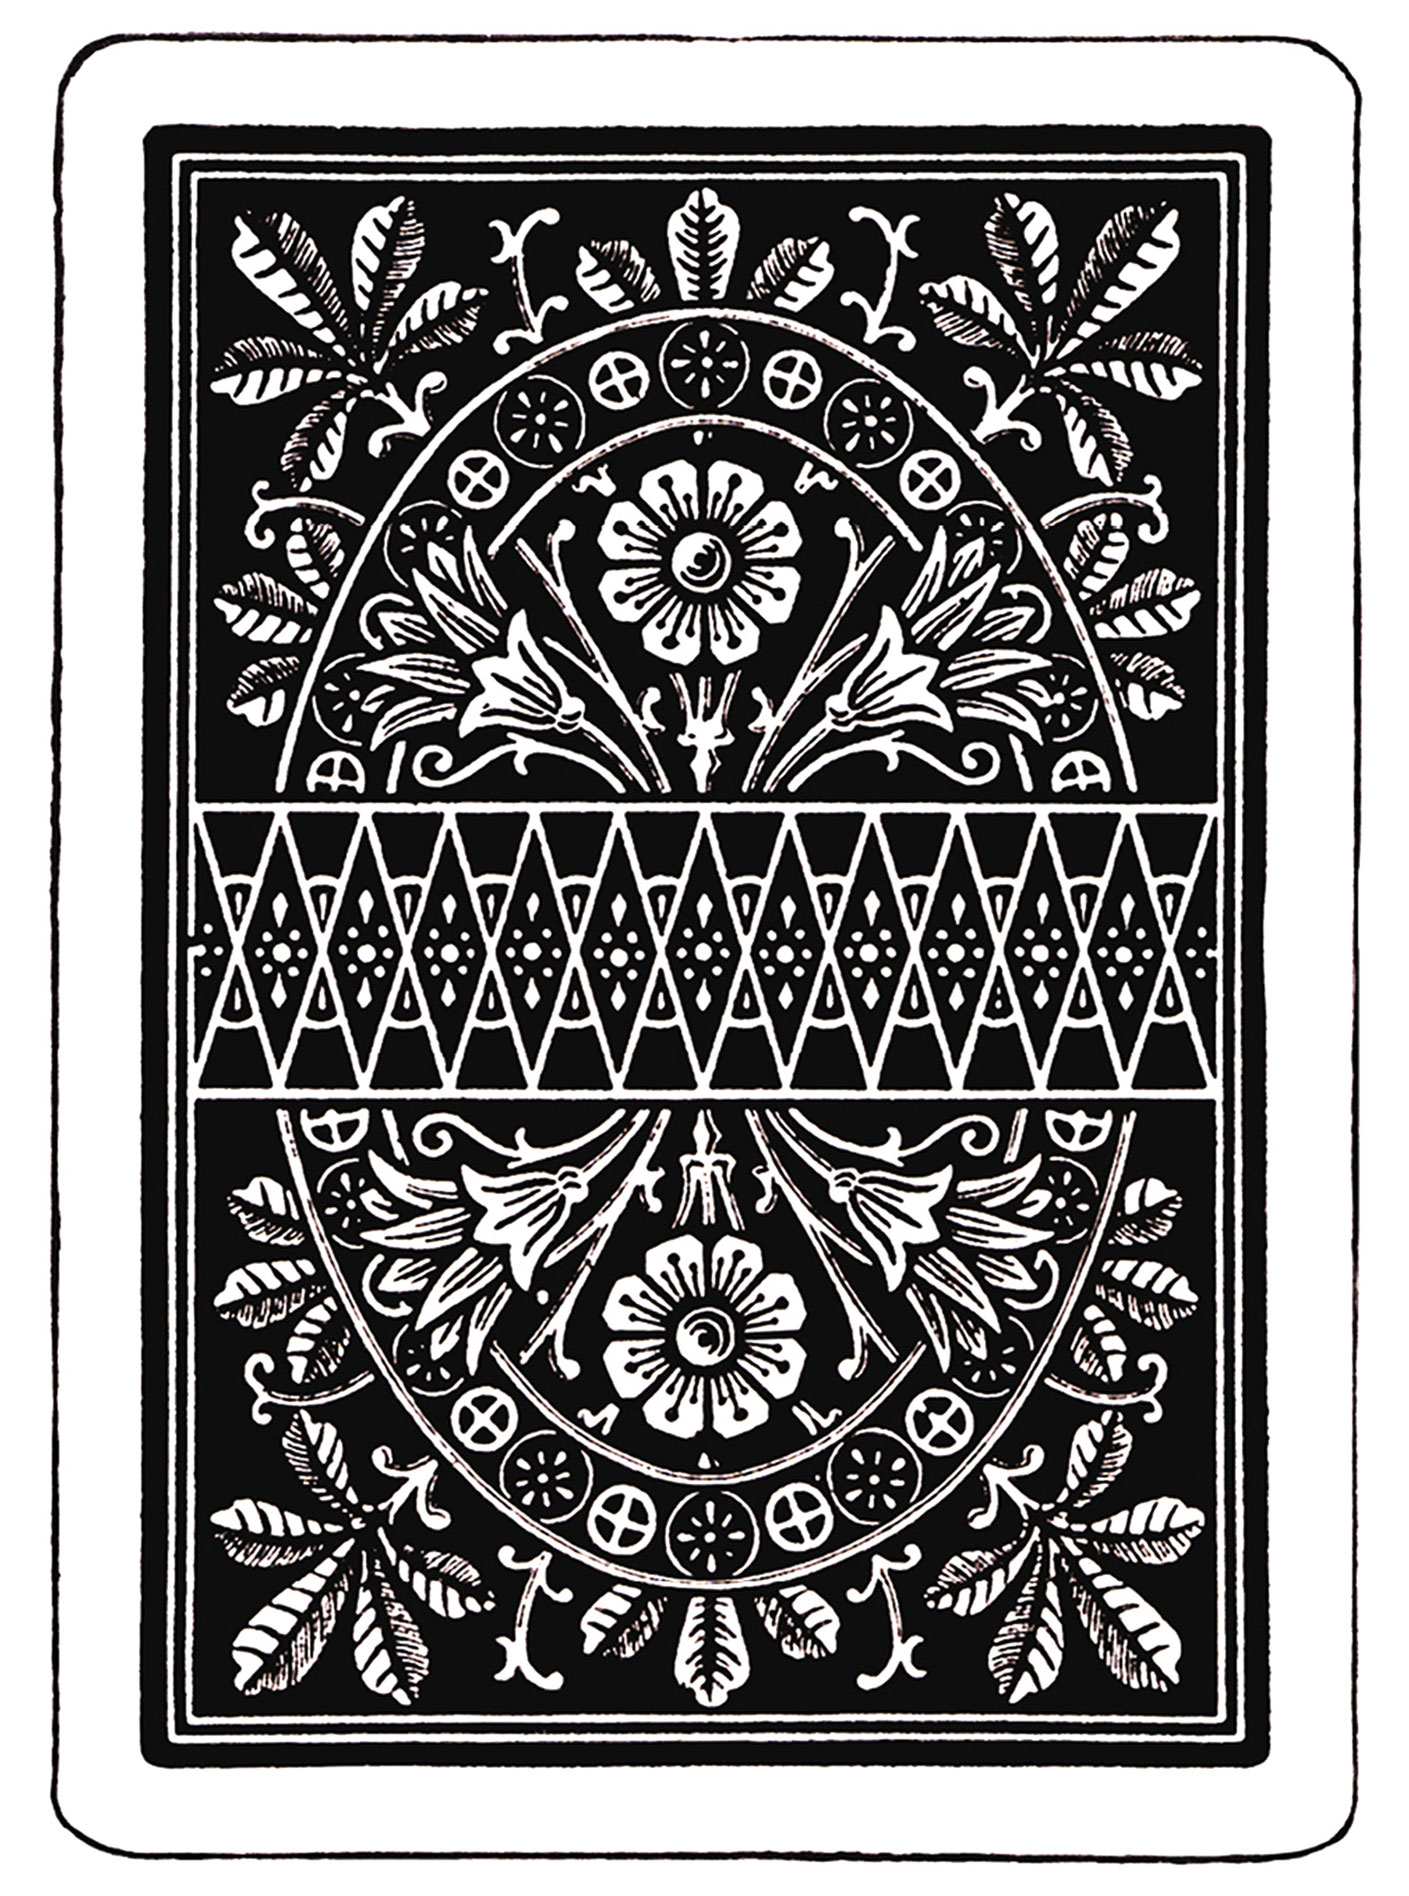 A scan of the back of a playing card that is marked by its use of the “shading” technique on a leaf motif. 